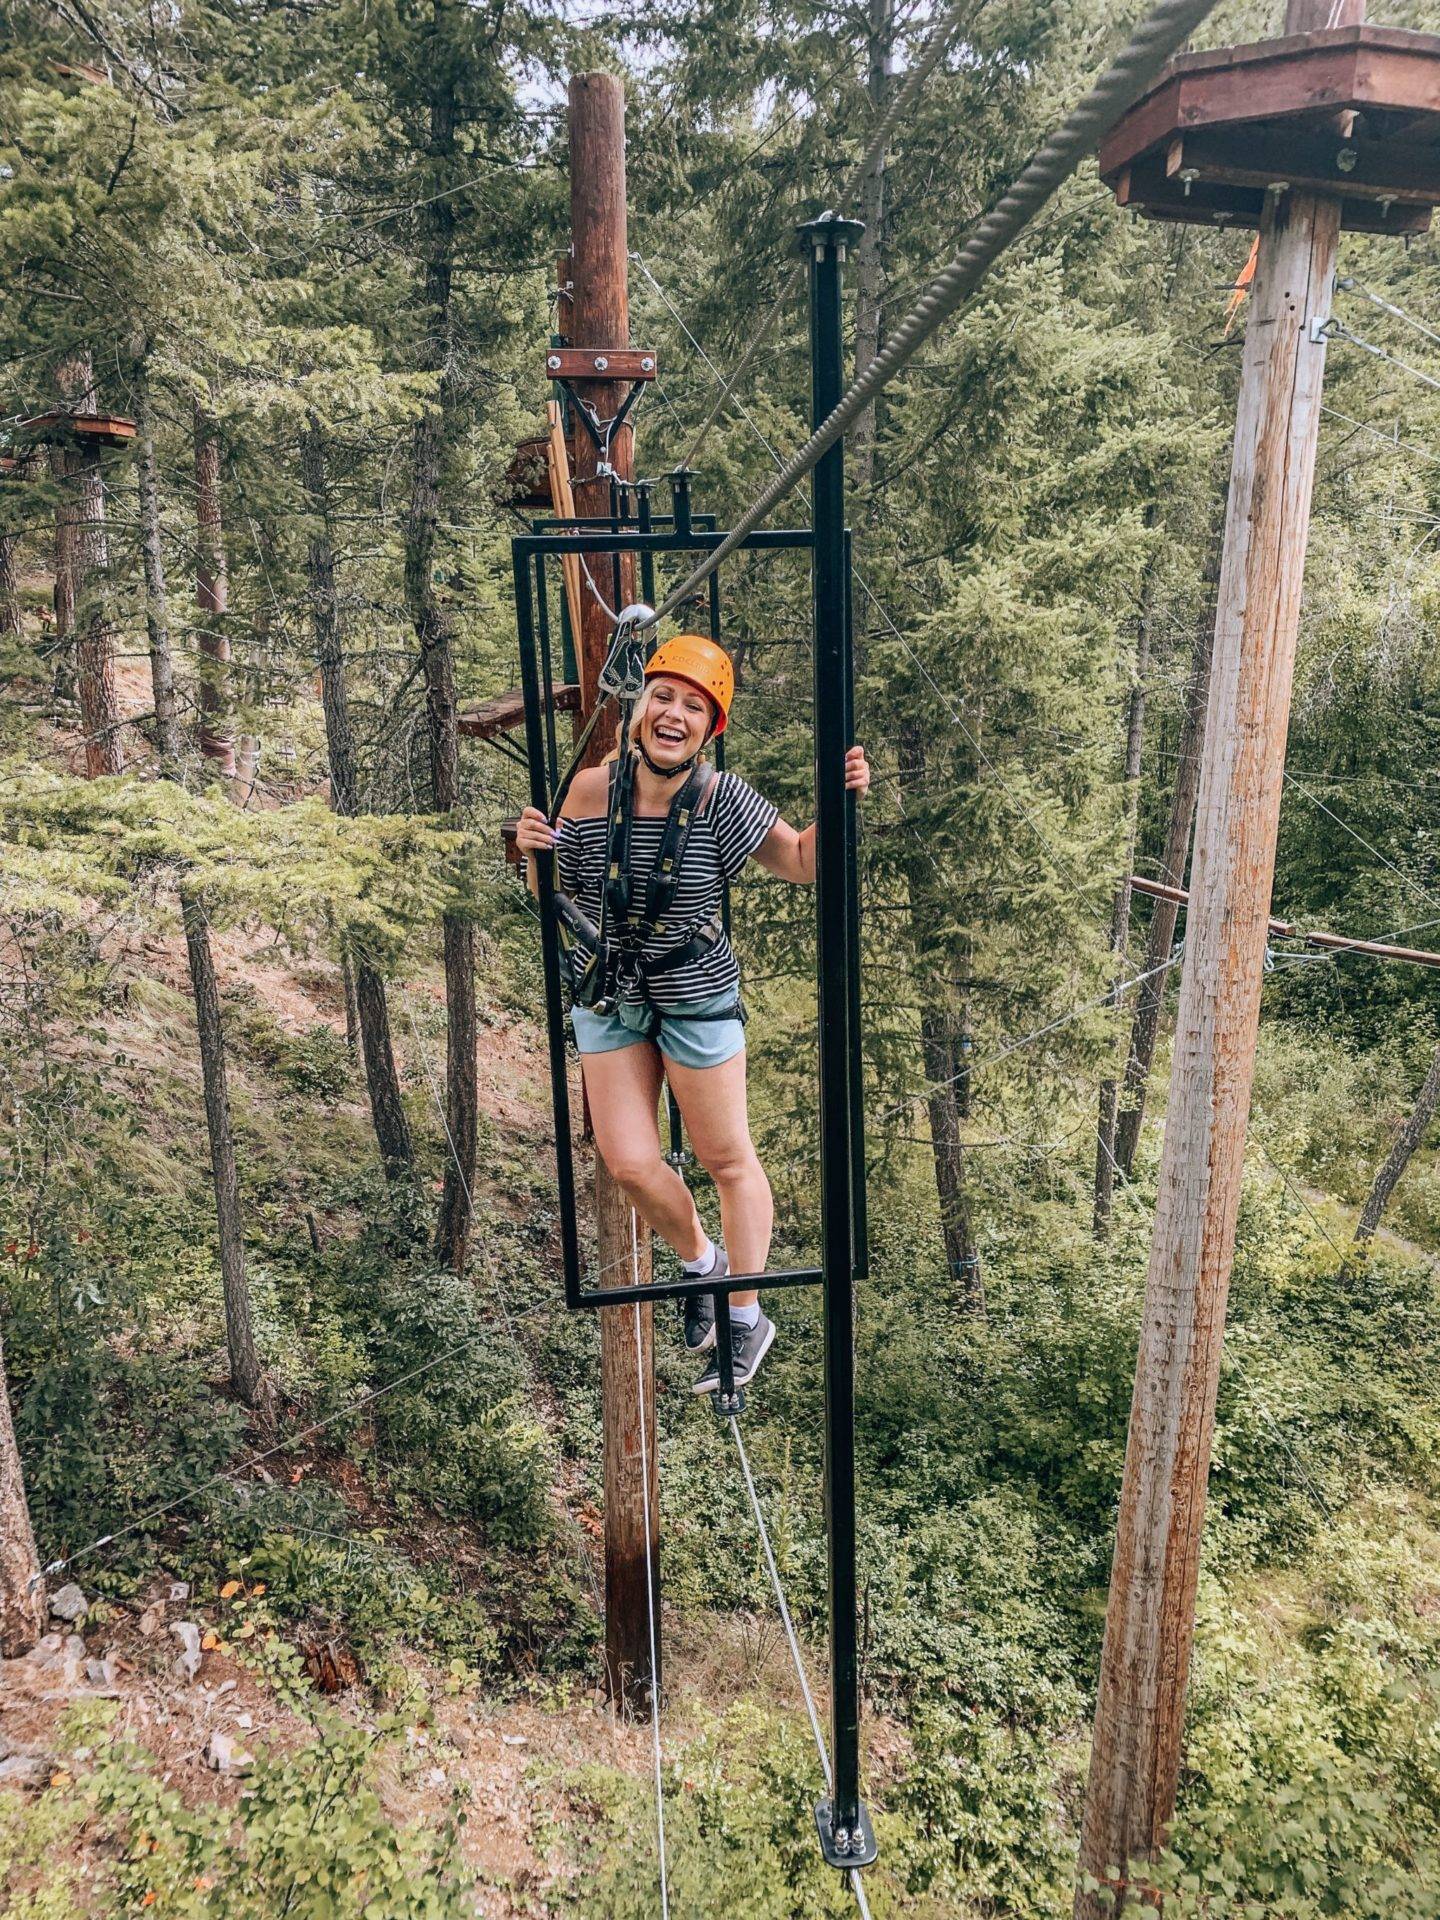 Planning a trip to Kelowna soon? This guide covers all the best things to do in Kelowna from a locals perspective! From wineries and cideries, to adventure activities, hikes, waters sports and more. This guide has everything you need to plan your visit to beautiful Kelowna! Pictured here: Oyama Zipline & Aerial Adventure Park